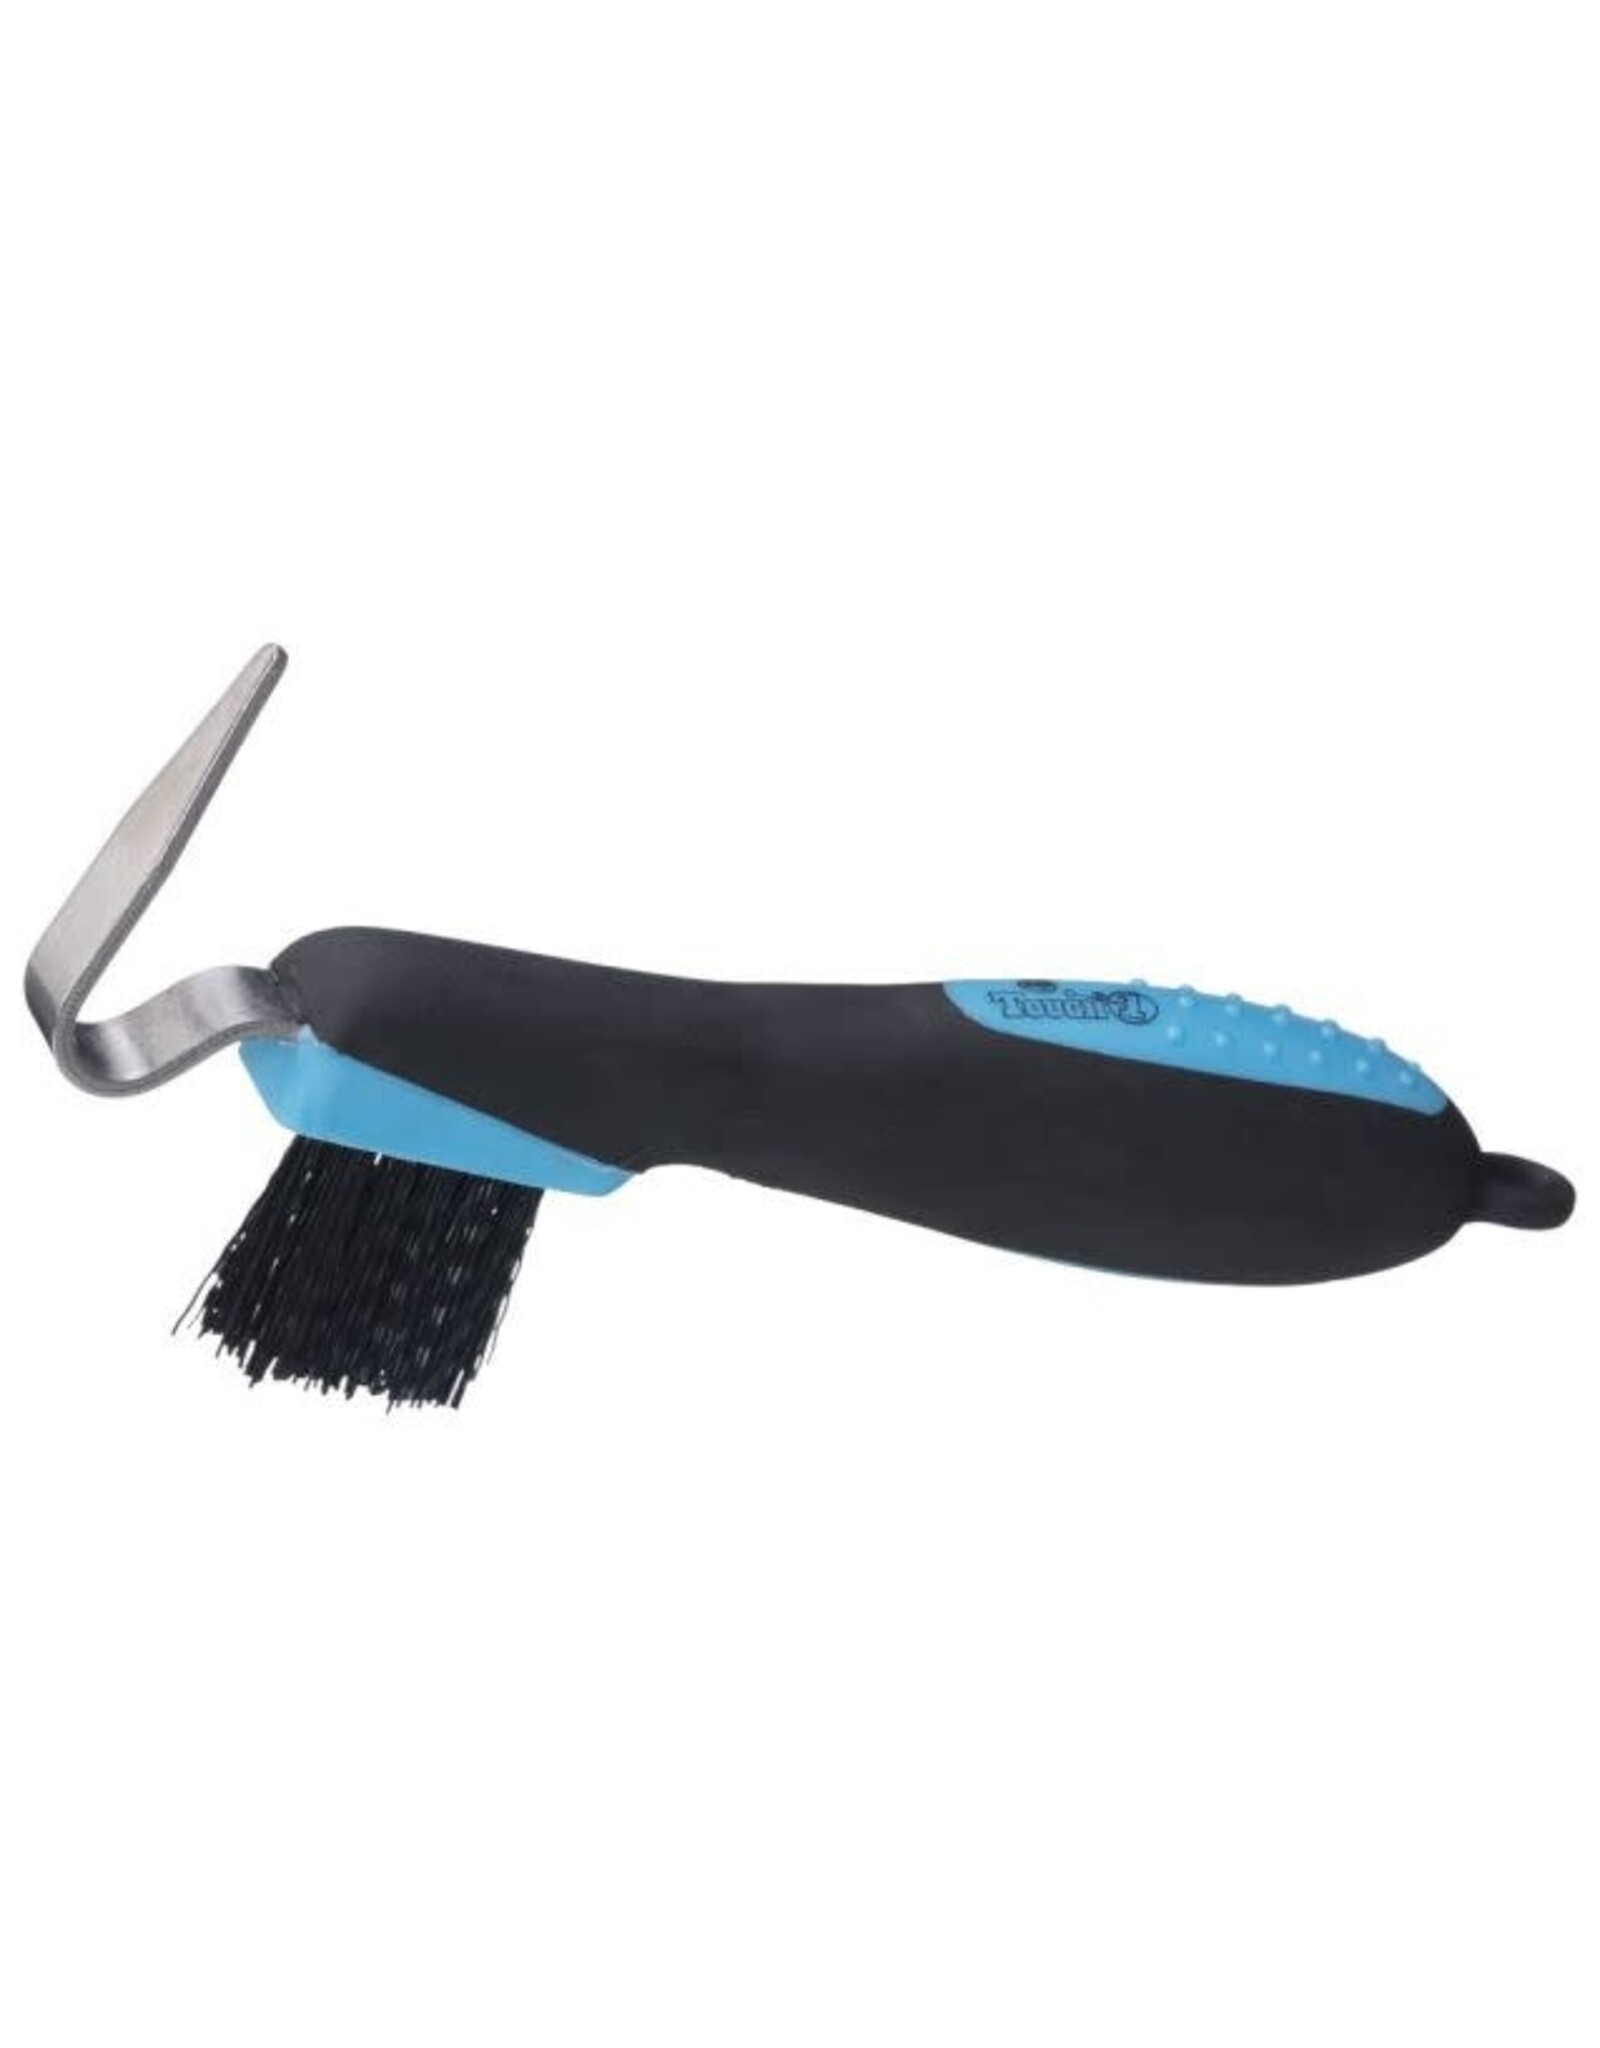 Tough One Great Grips Hoof Pick with Brush